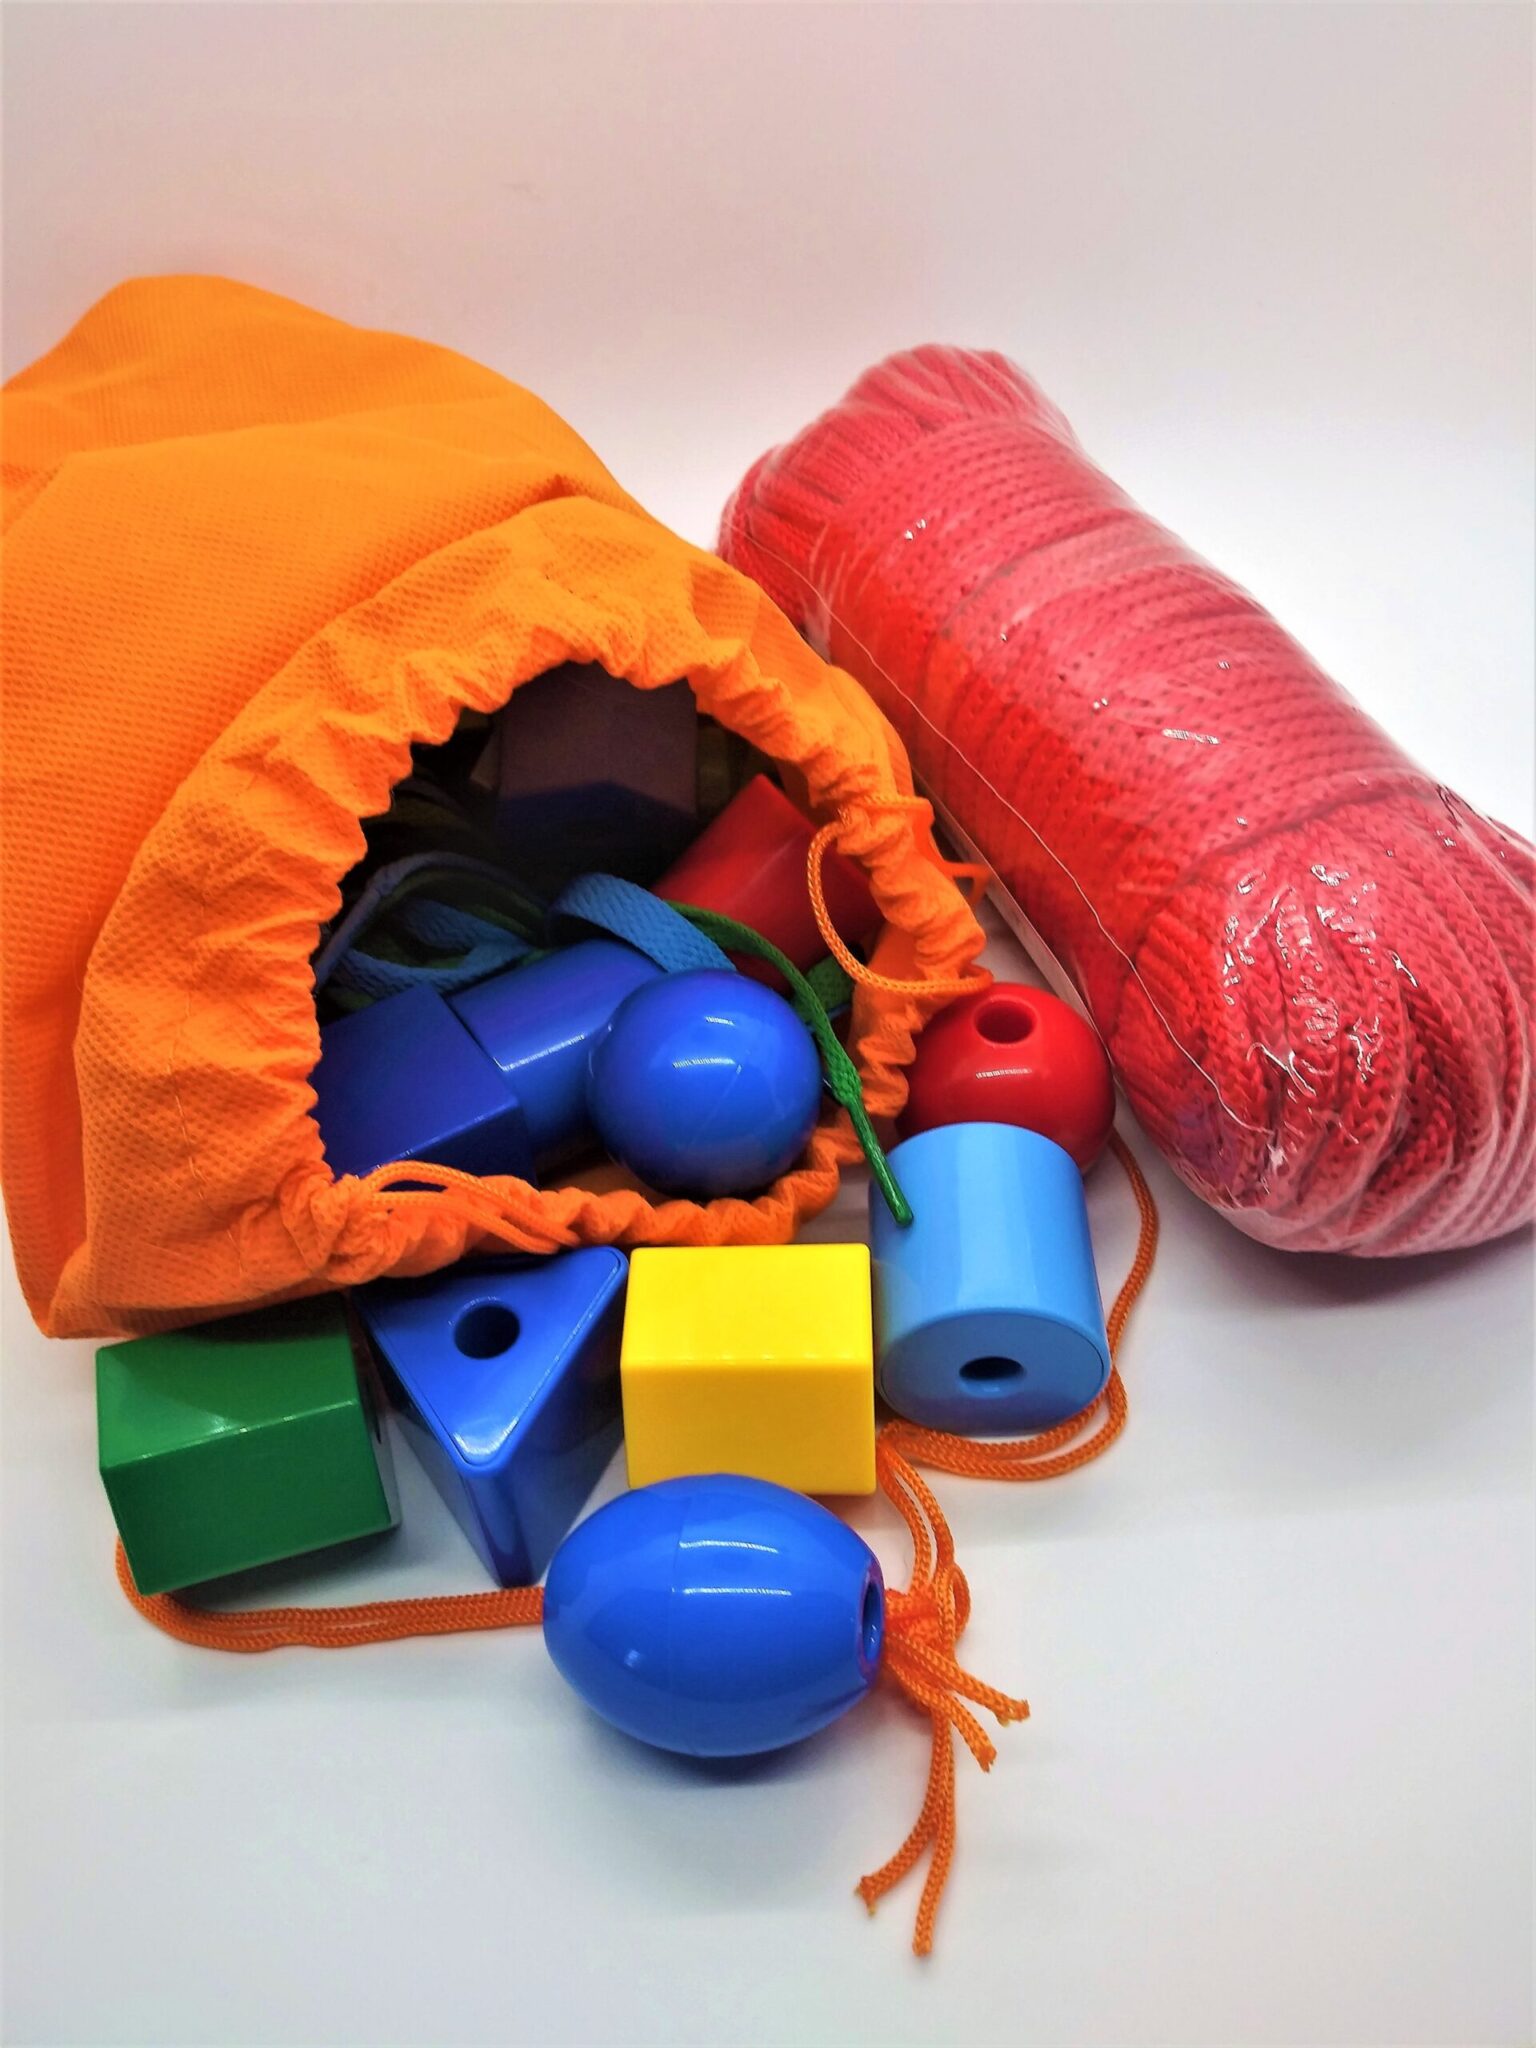 BIY anal beads. Photo of a bag of children's plastic stringing beads and a package of red, nylon rope.